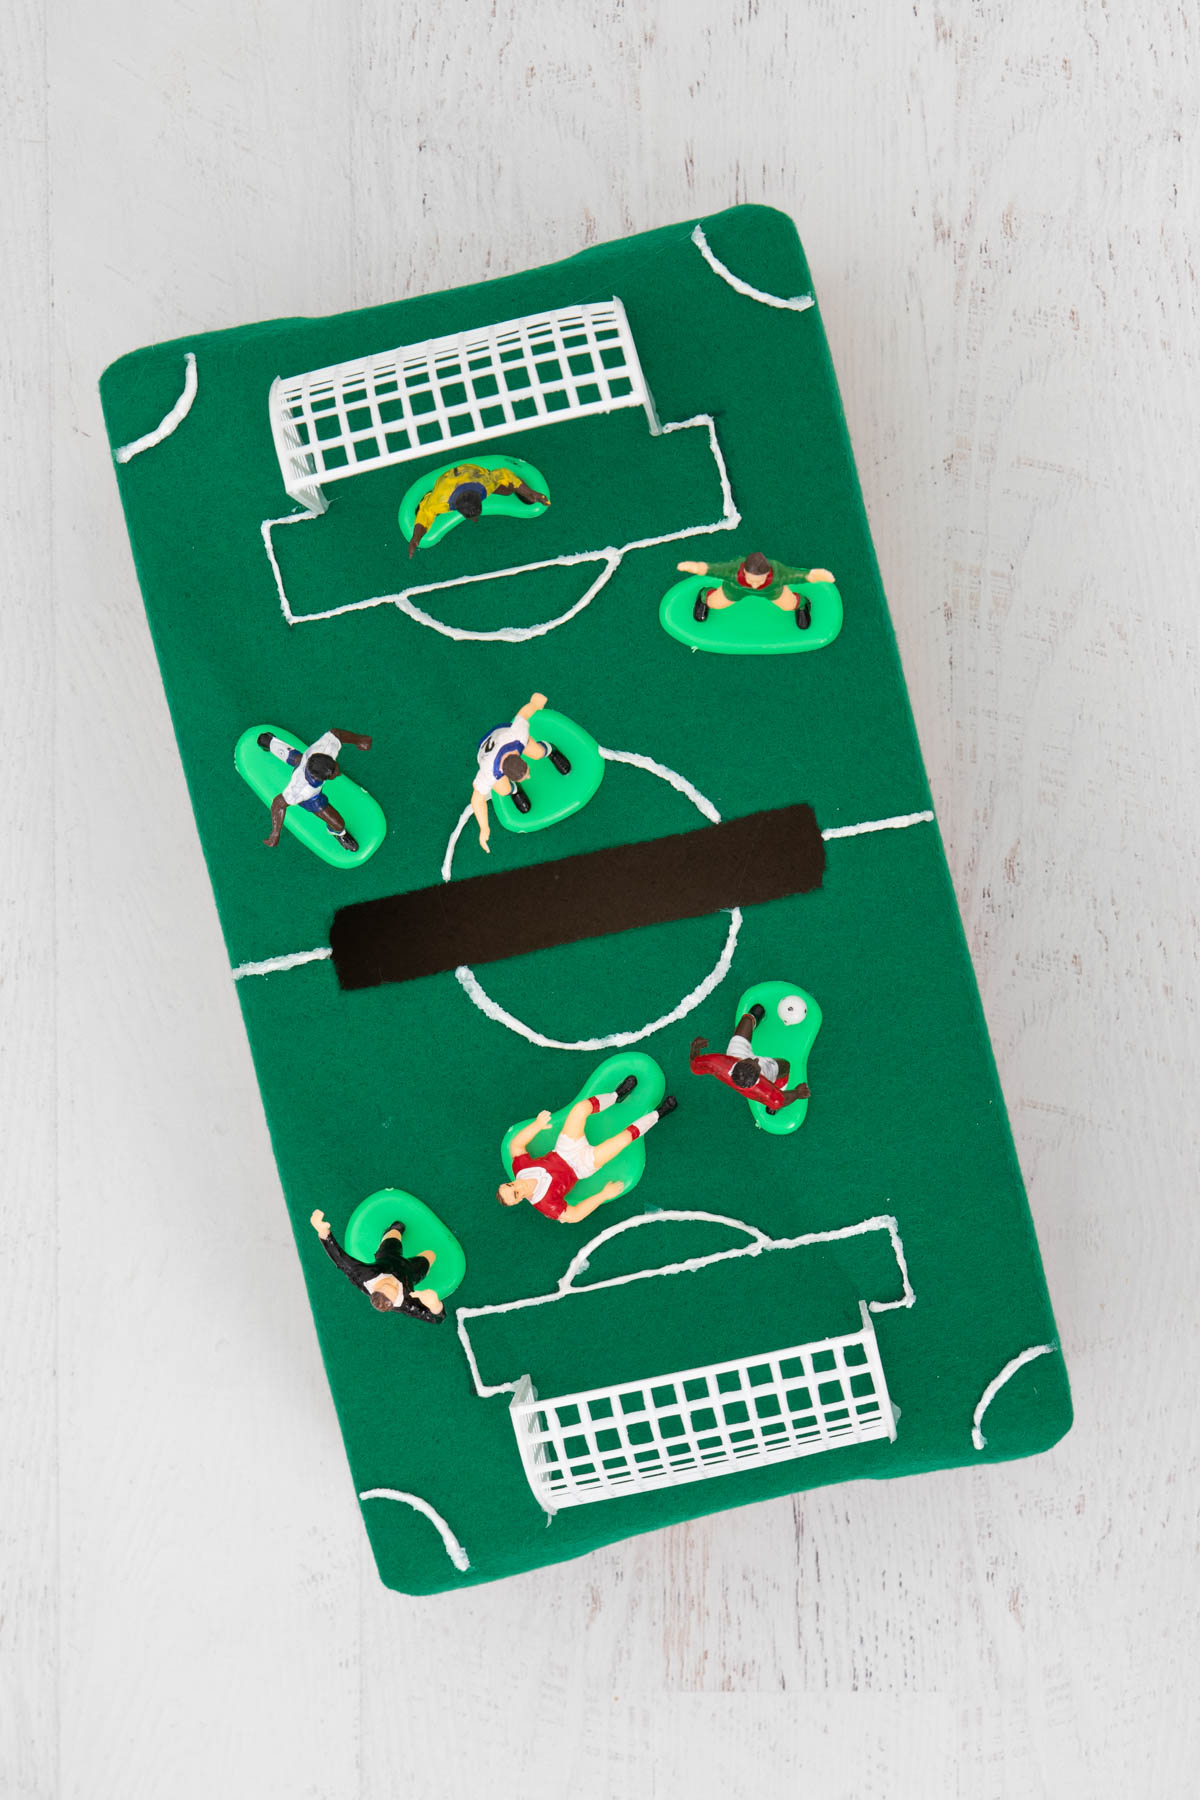 A small box decorated like a soccer field with toy people on it.